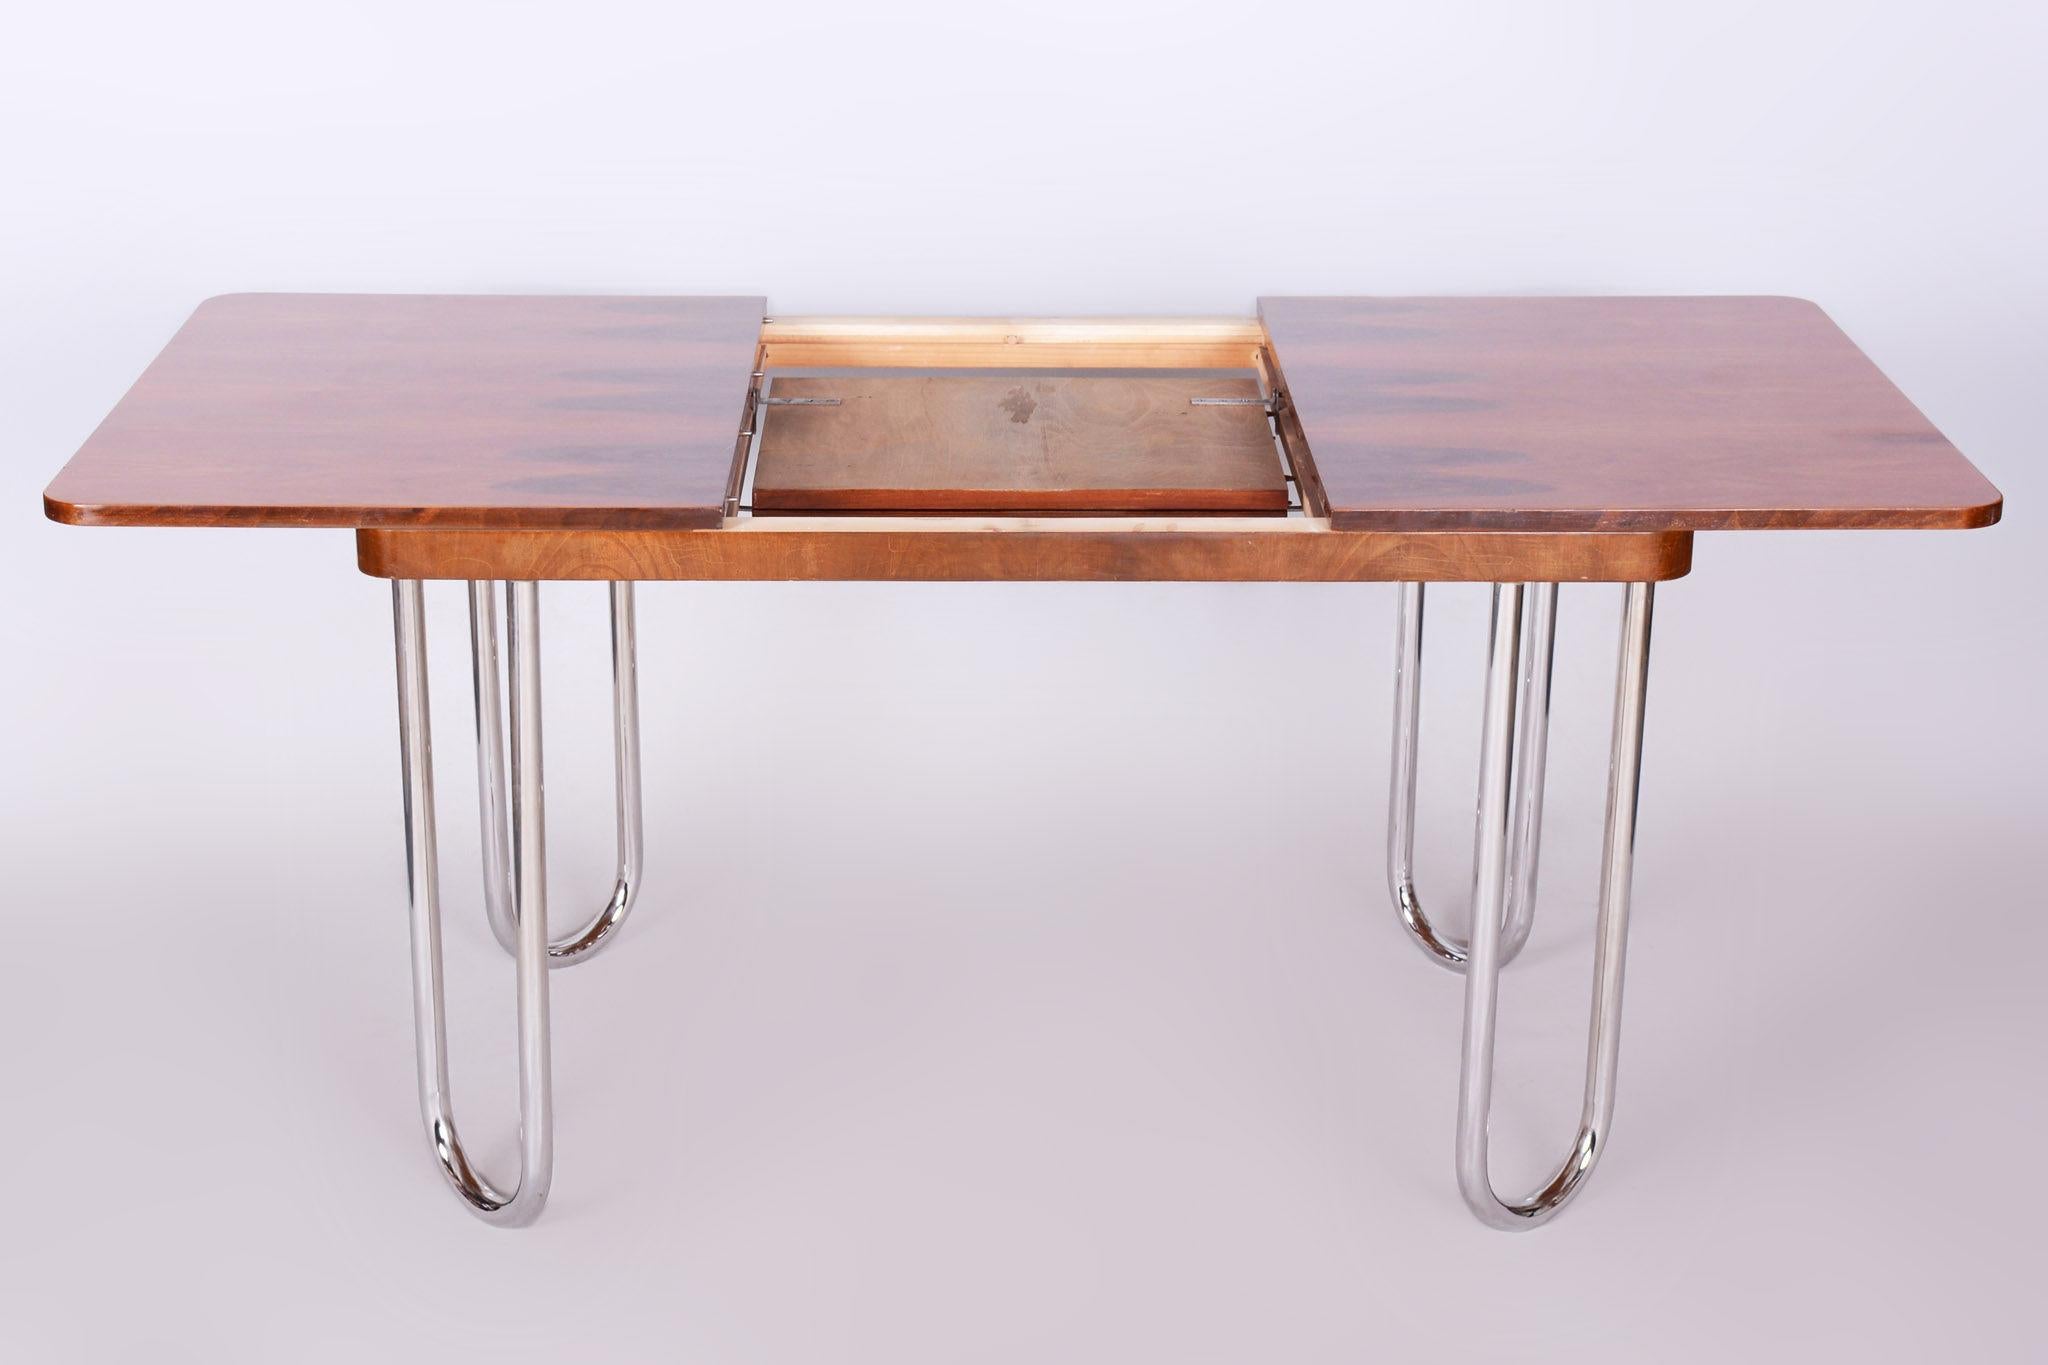 Czech Bauhaus Chrome Folding Dining Table by Halabala, 1930s, Restored, Walnut In Good Condition For Sale In Horomerice, CZ